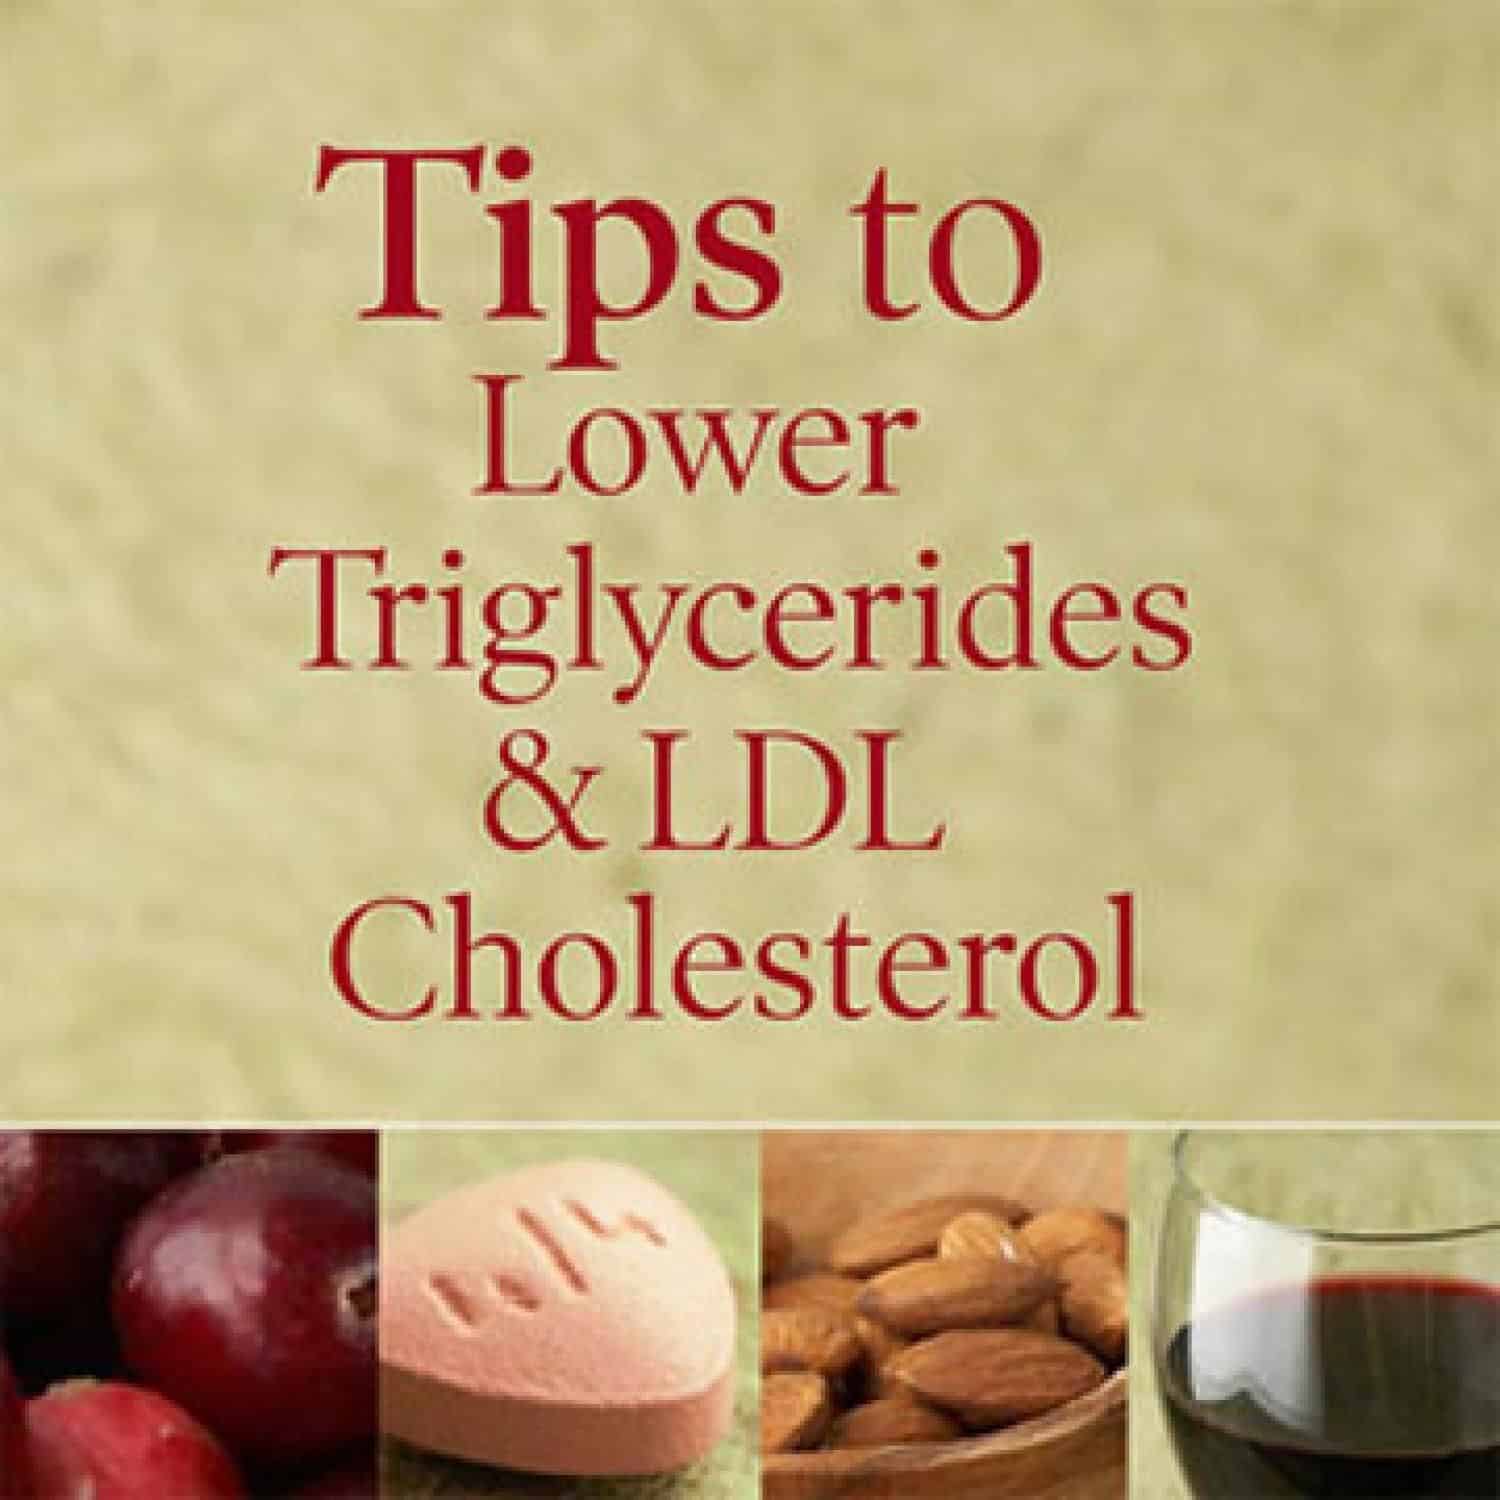 How to Lower Triglycerides &  LDL Cholesterol